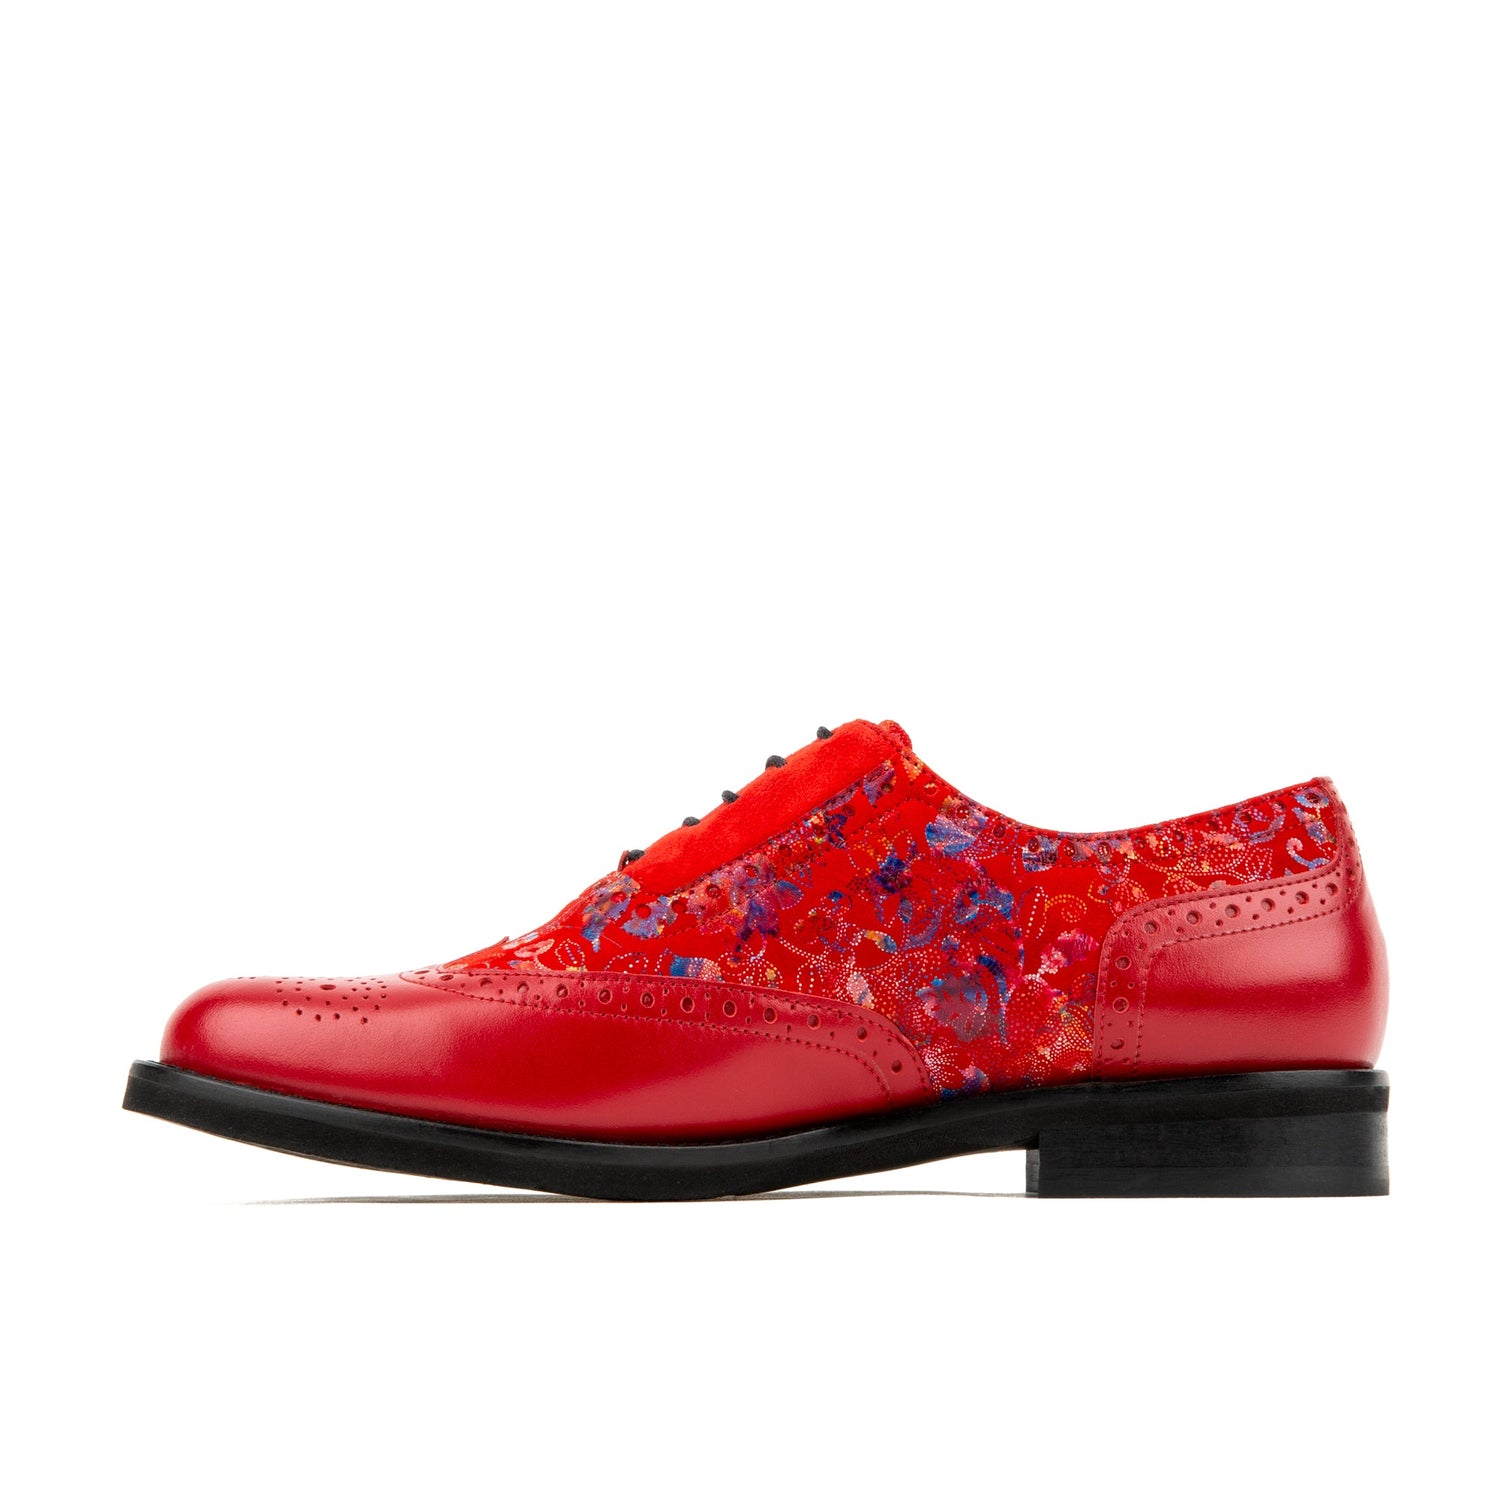 Vivienne - Red Flower Shoes Embassy London 